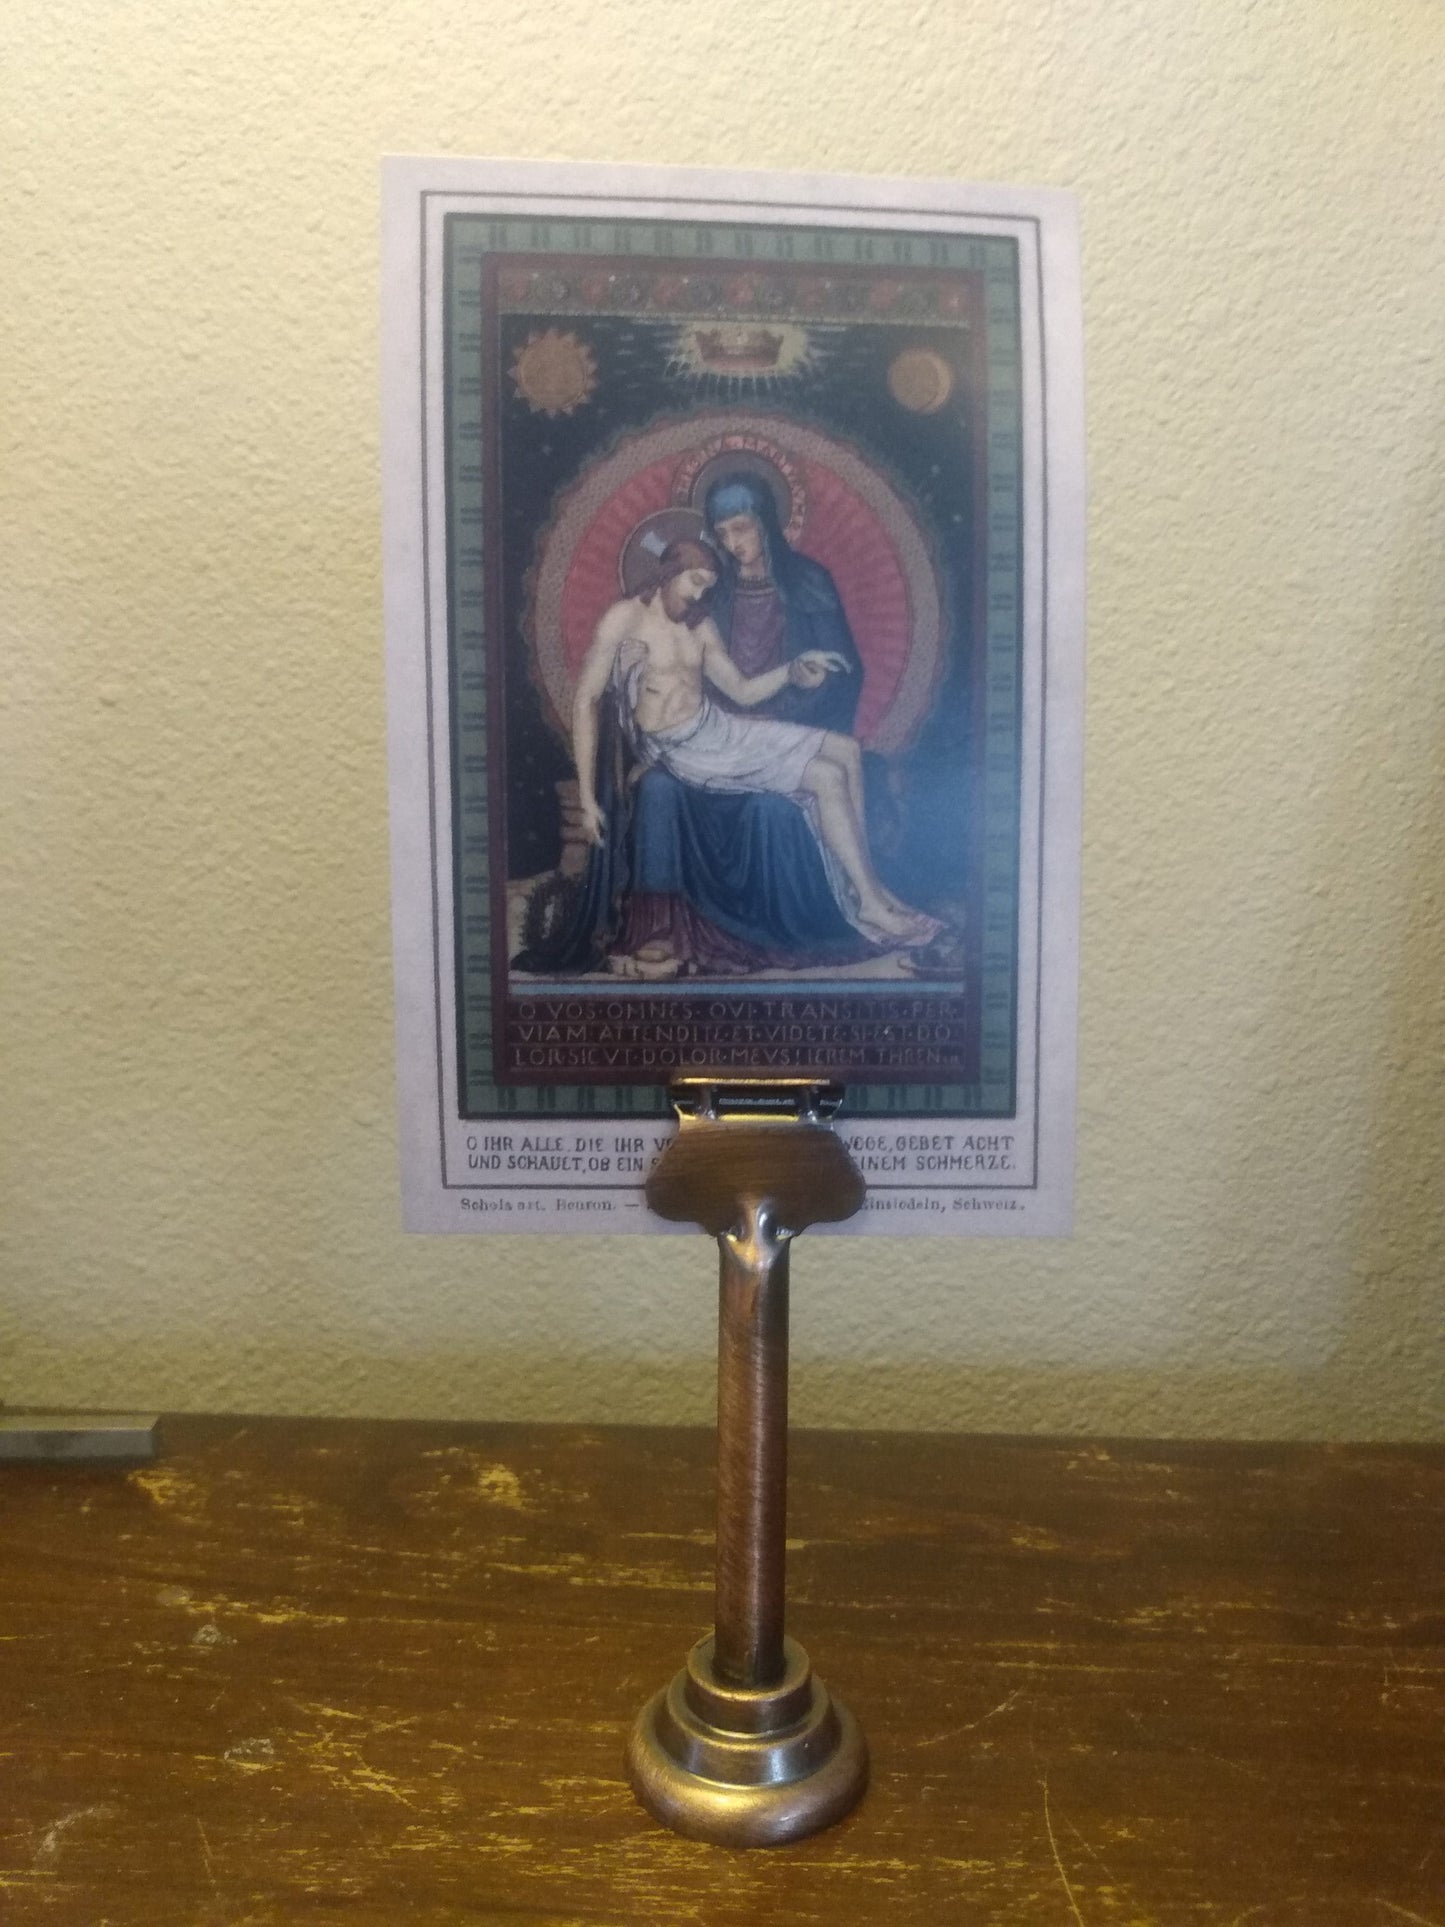 New! Holy Card Stand, Tall – 3" Stand Only – (Holy Card Not Included) – Copper-Colored Steel Stand to Display Holy Card